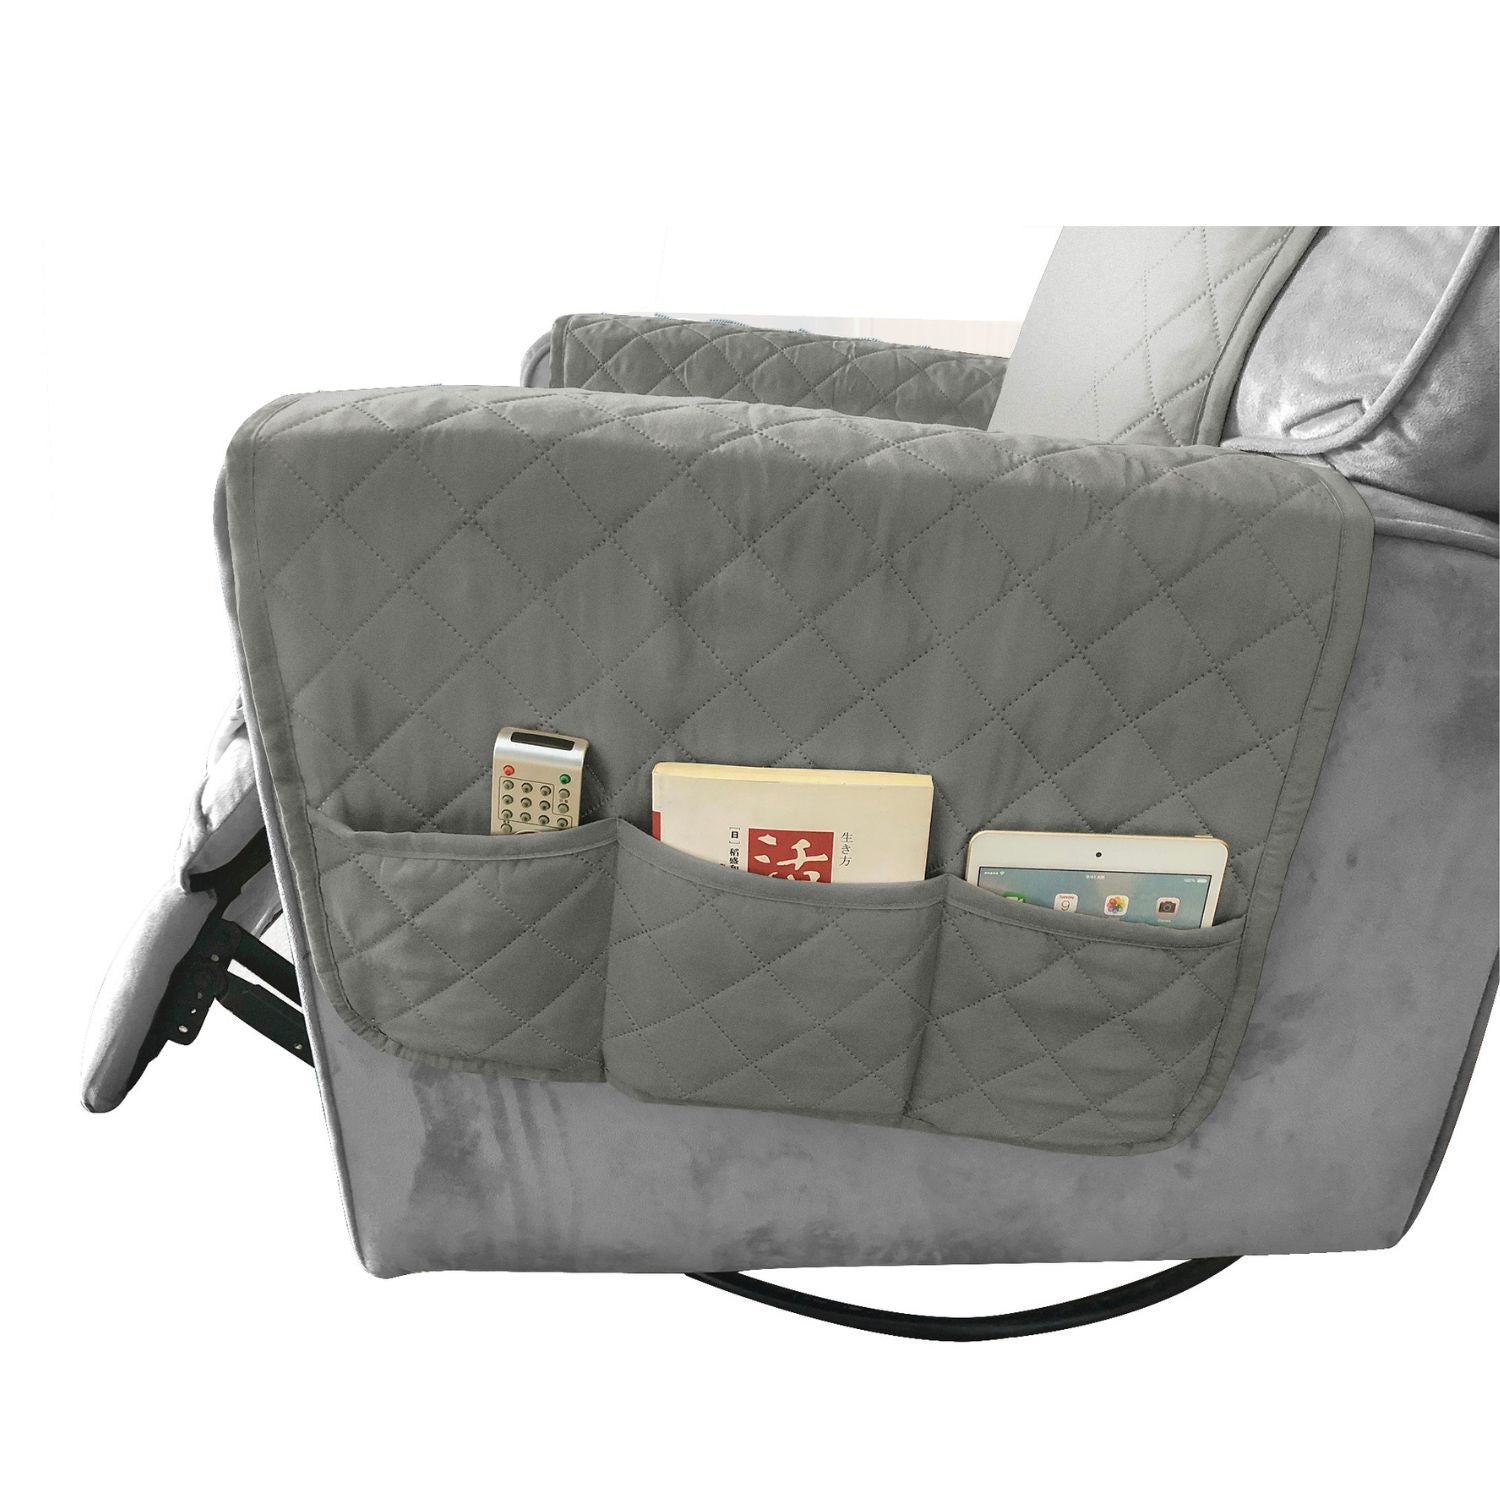 FLOOFI Pet Sofa Cover Recliner Chair L Size with Pocket (Light Grey) FI-PSC-118-BY